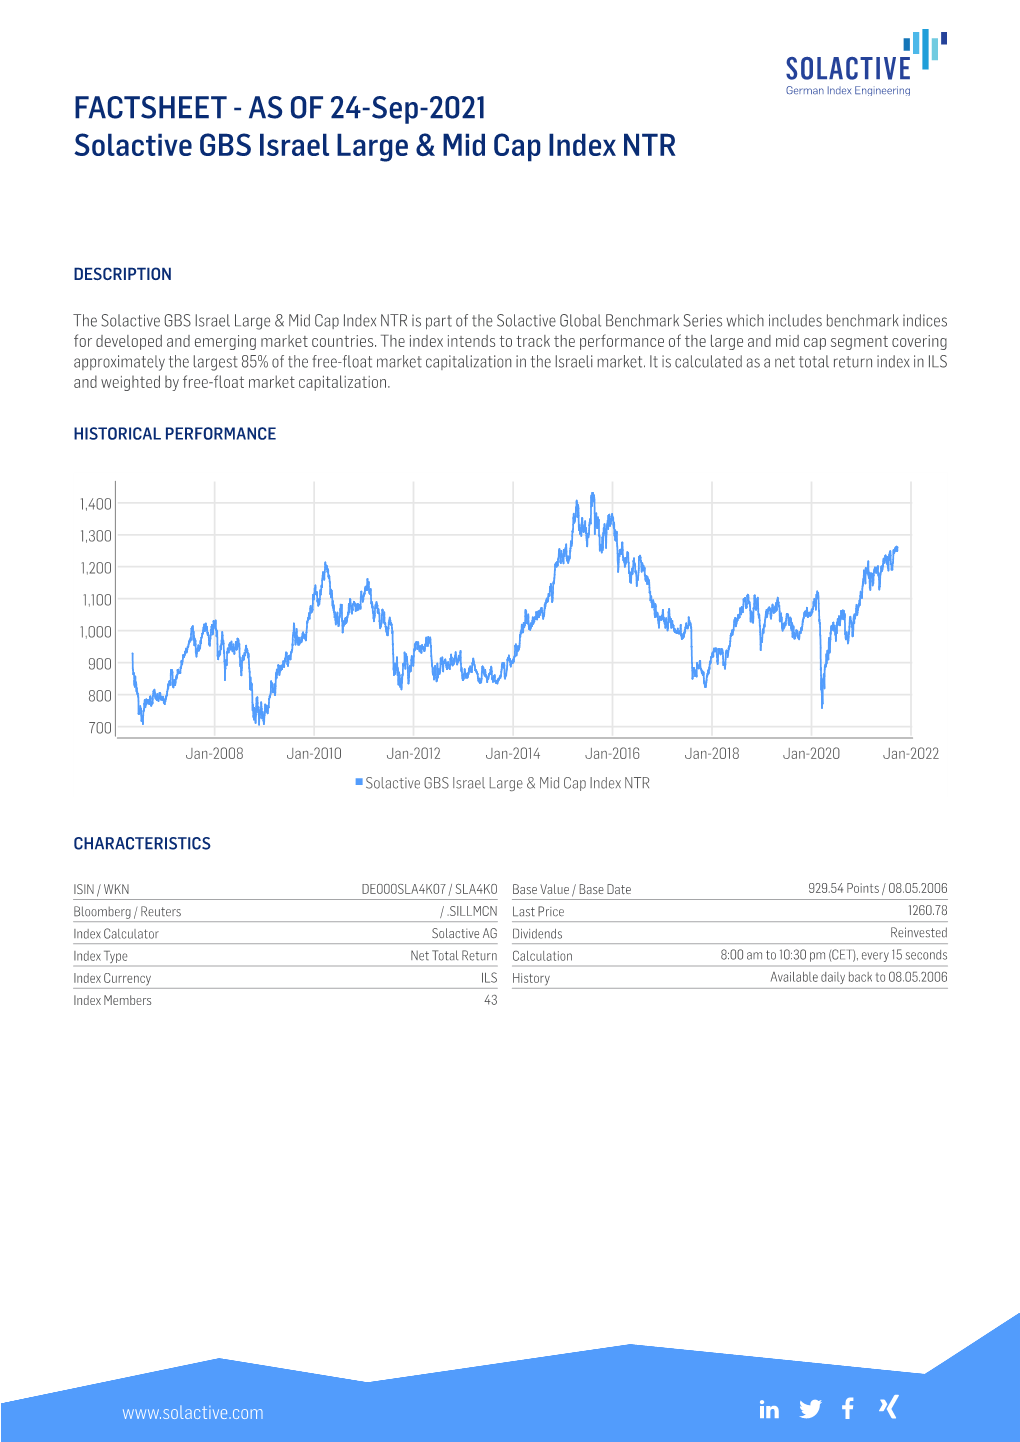 FACTSHEET - AS of 24-Sep-2021 Solactive GBS Israel Large & Mid Cap Index NTR